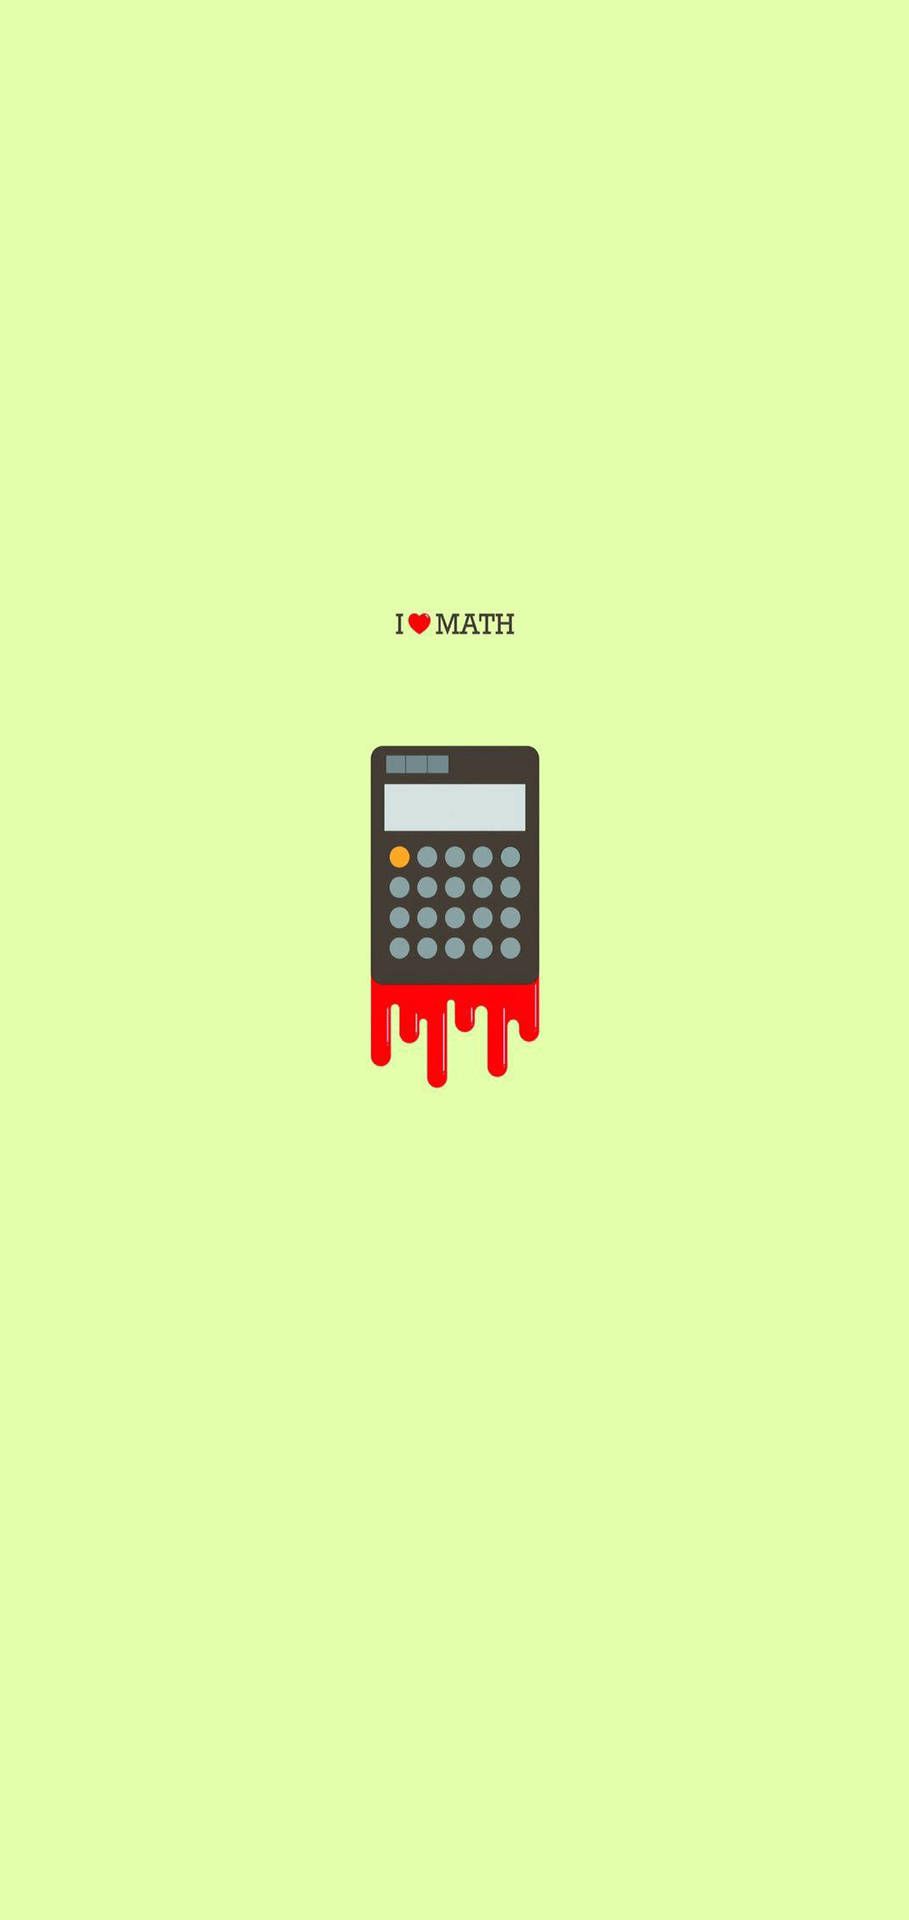 A wallpaper of an apple with blood on it - Math